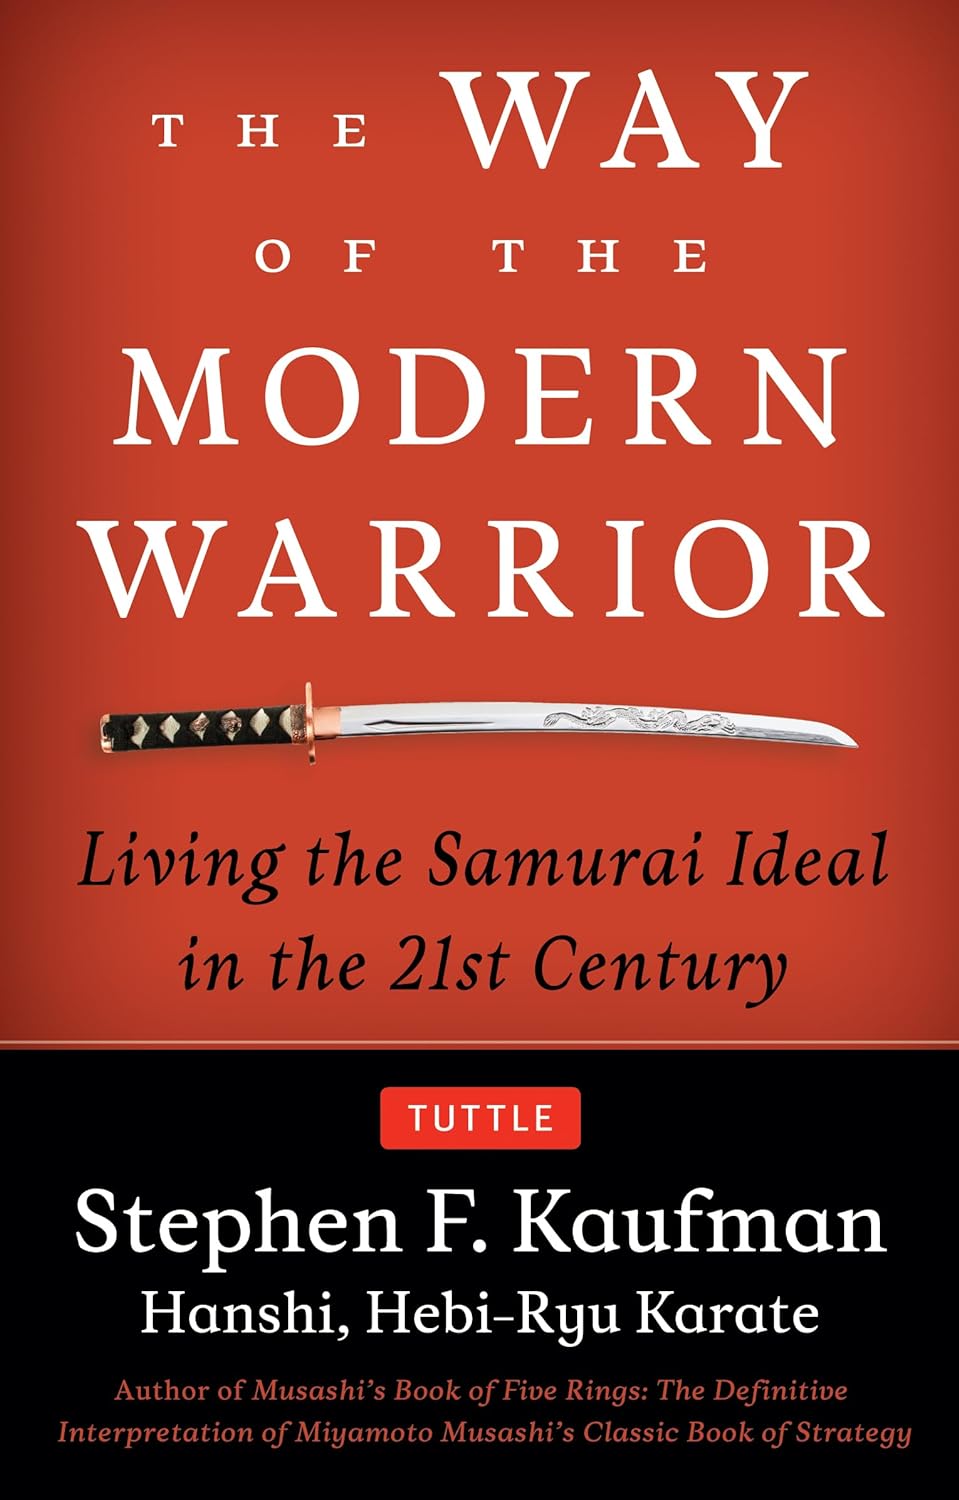 The Way of the Modern Warrior - Living the Samurai Ideal in the 21st Century